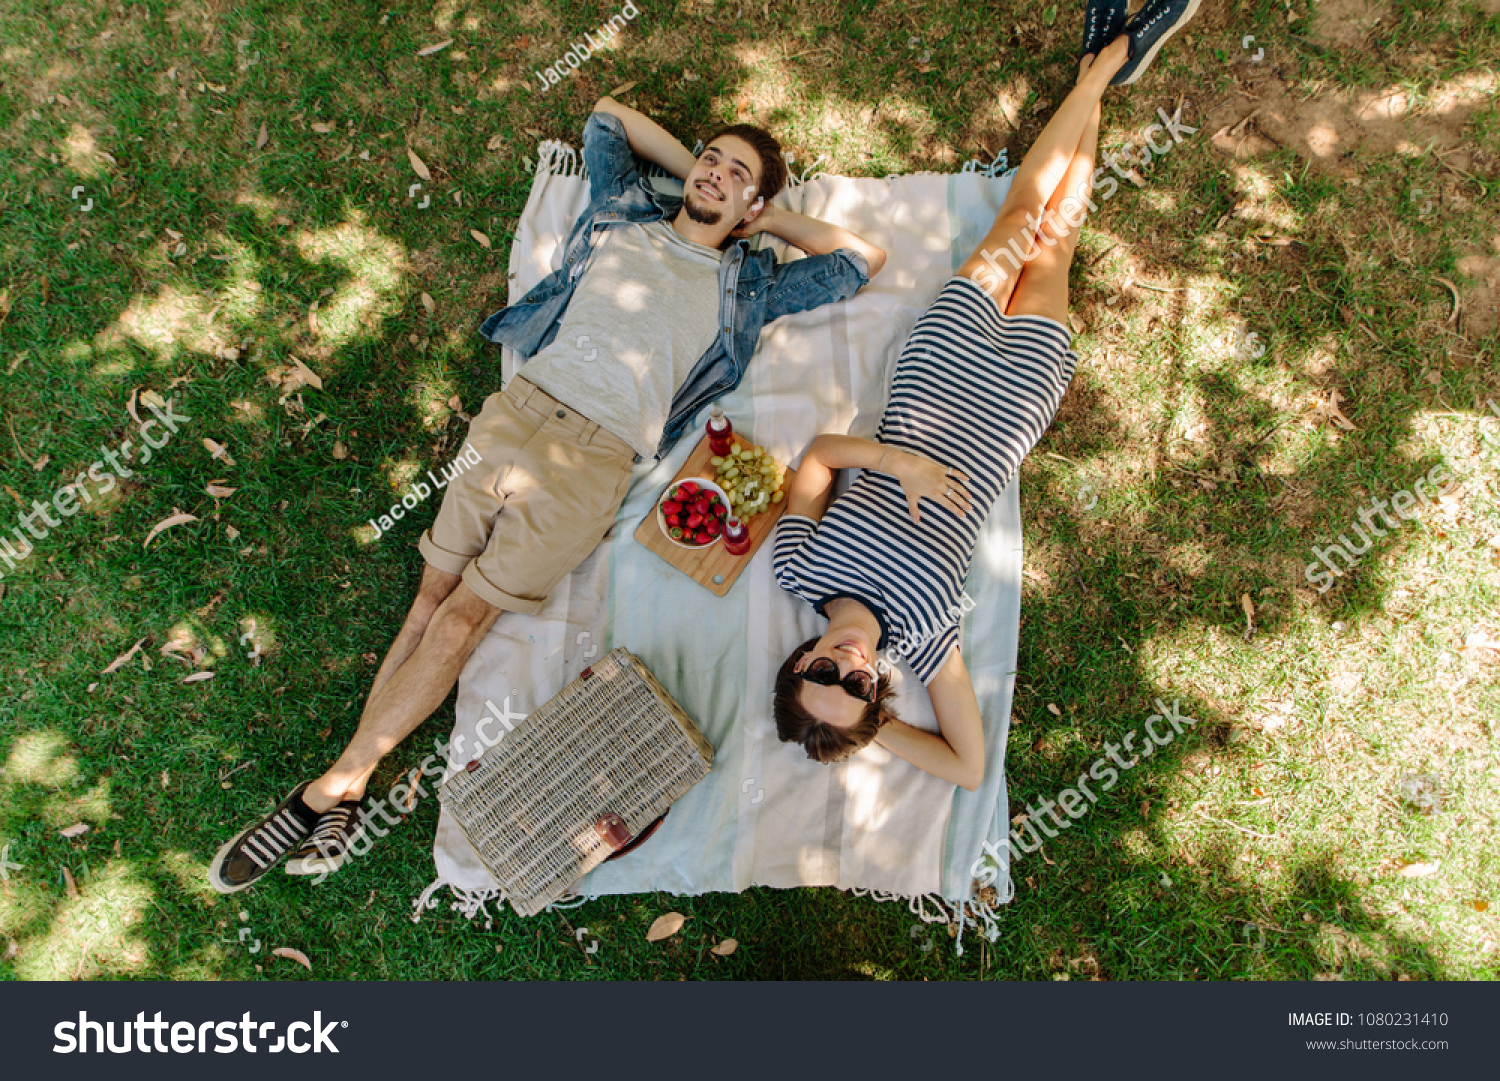 View from above of relaxed man and woman lying down at the park with hand basket, appetizing snacks and beers on blanket. Couple on picnic lying on blanket in grass outdoors. #1080231410